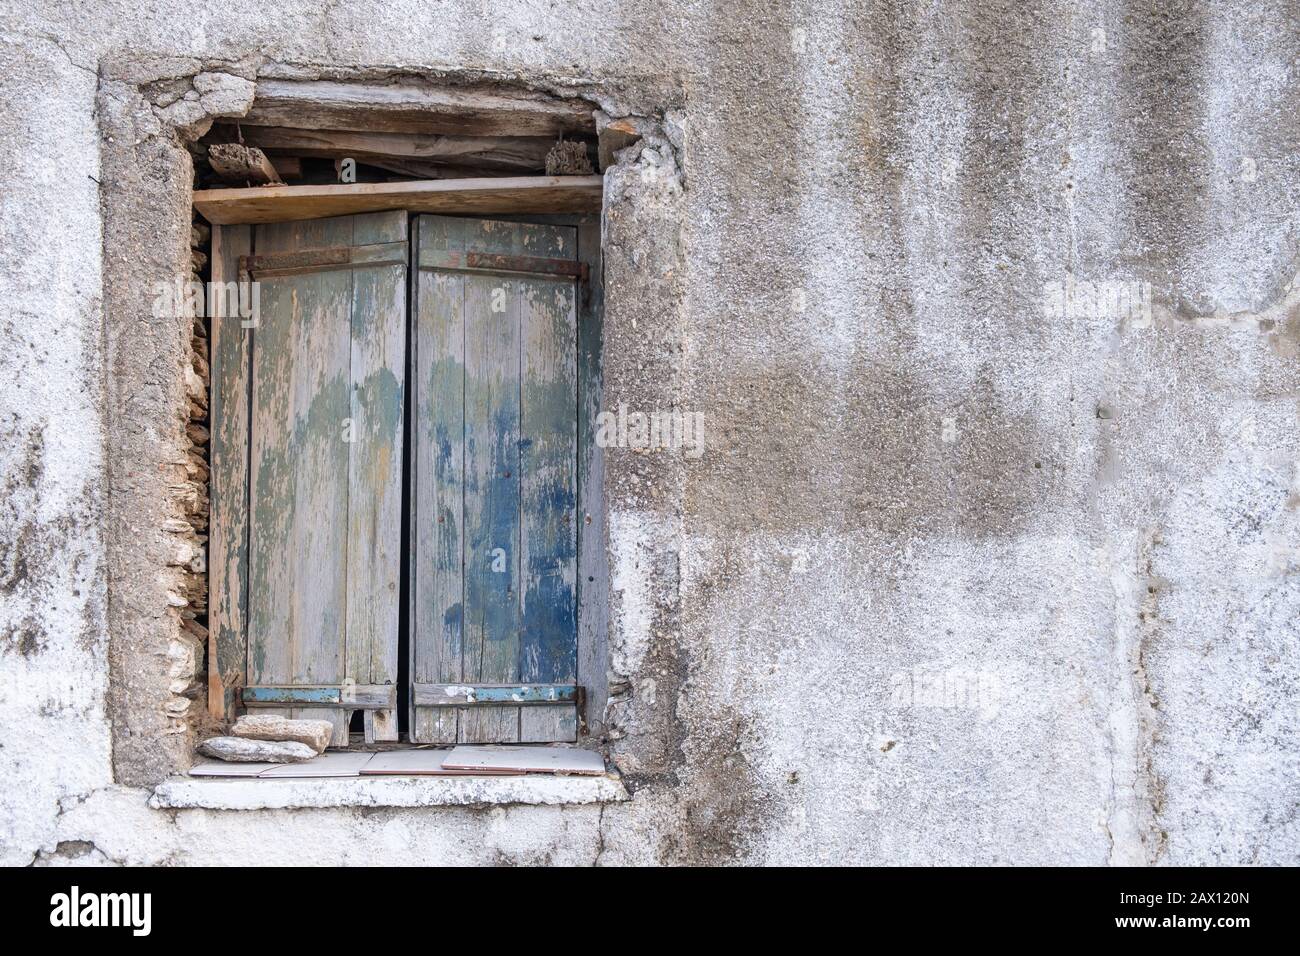 Old double closed wooden shutters. Rusty hinges on peeled planks,  stones keep the window shut. Wall empty and faded. Copy space. Stock Photo